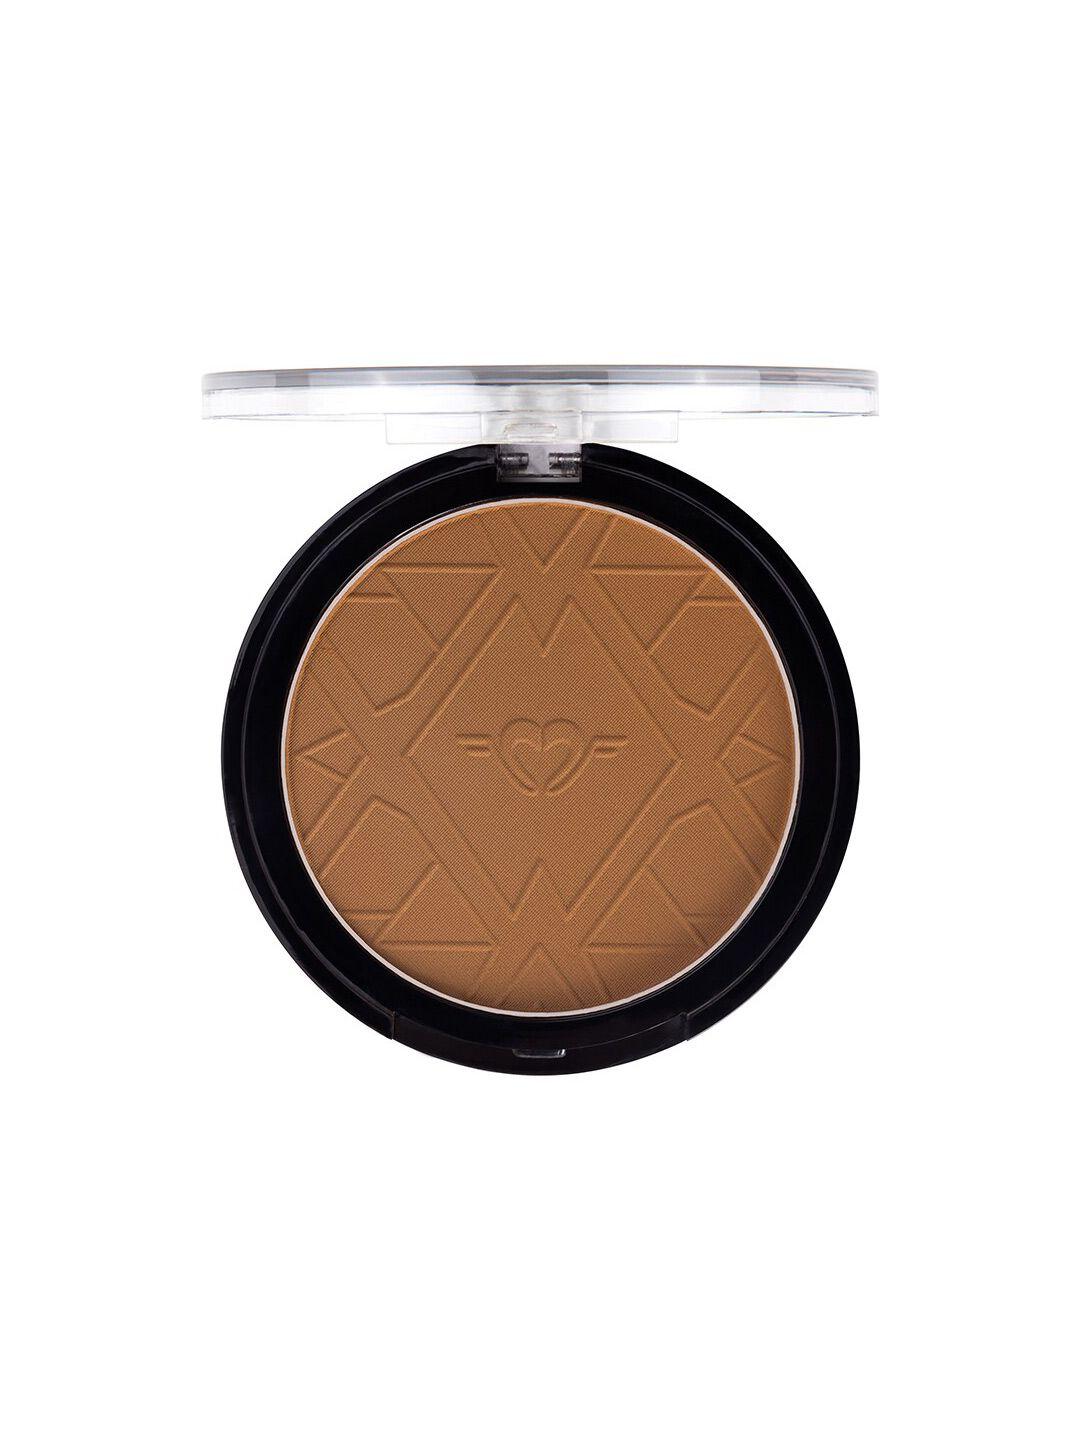 daily-life-forever52-flawless-fusion-bronzer-12-g---golden-brown-05